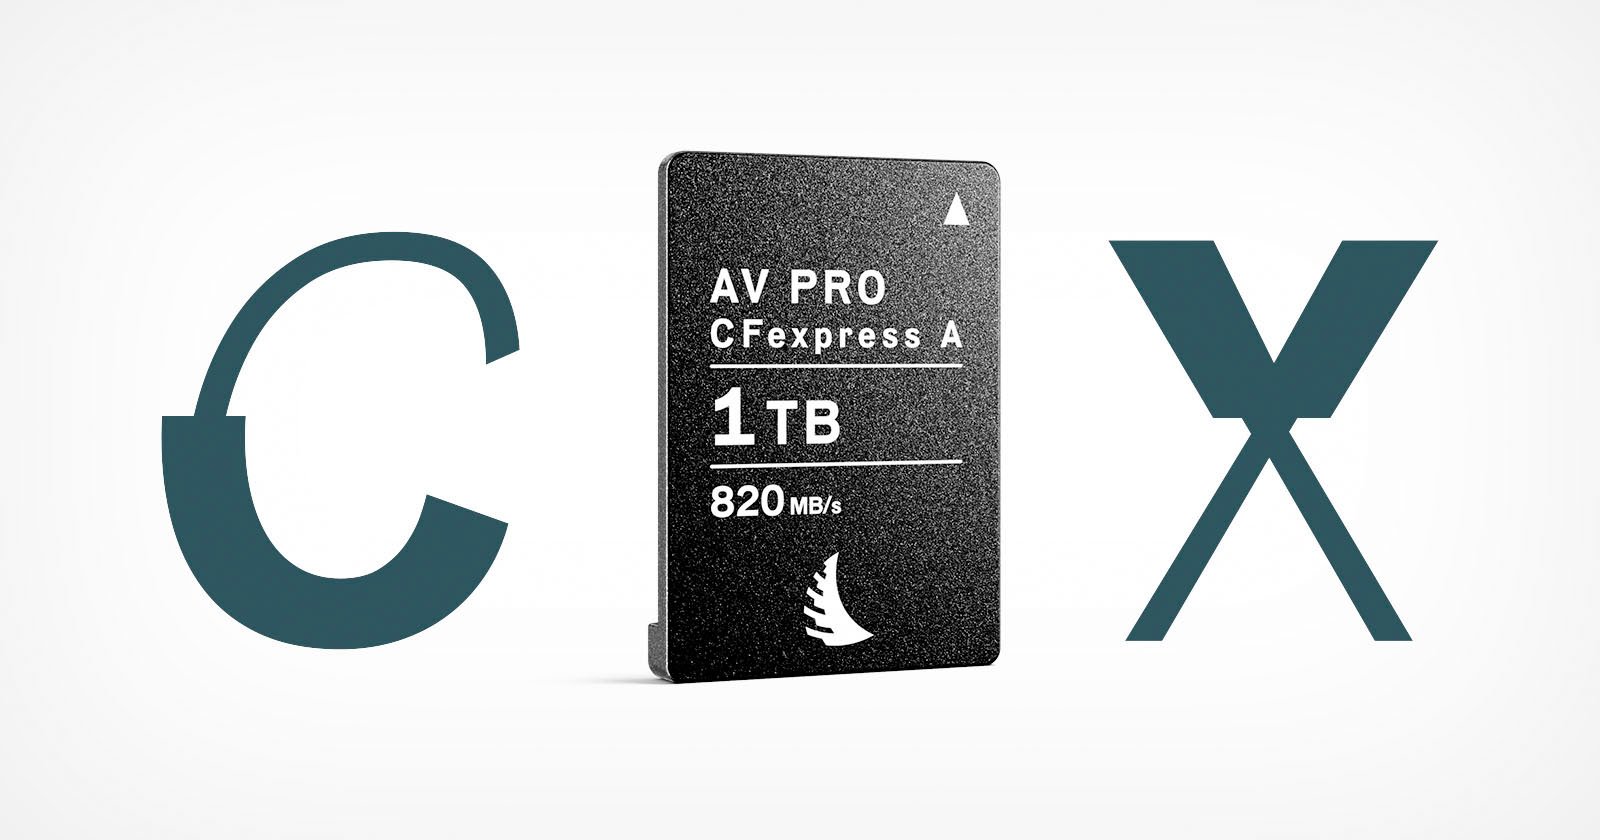  angelbird discontinues its 1tb sony cfe card months 